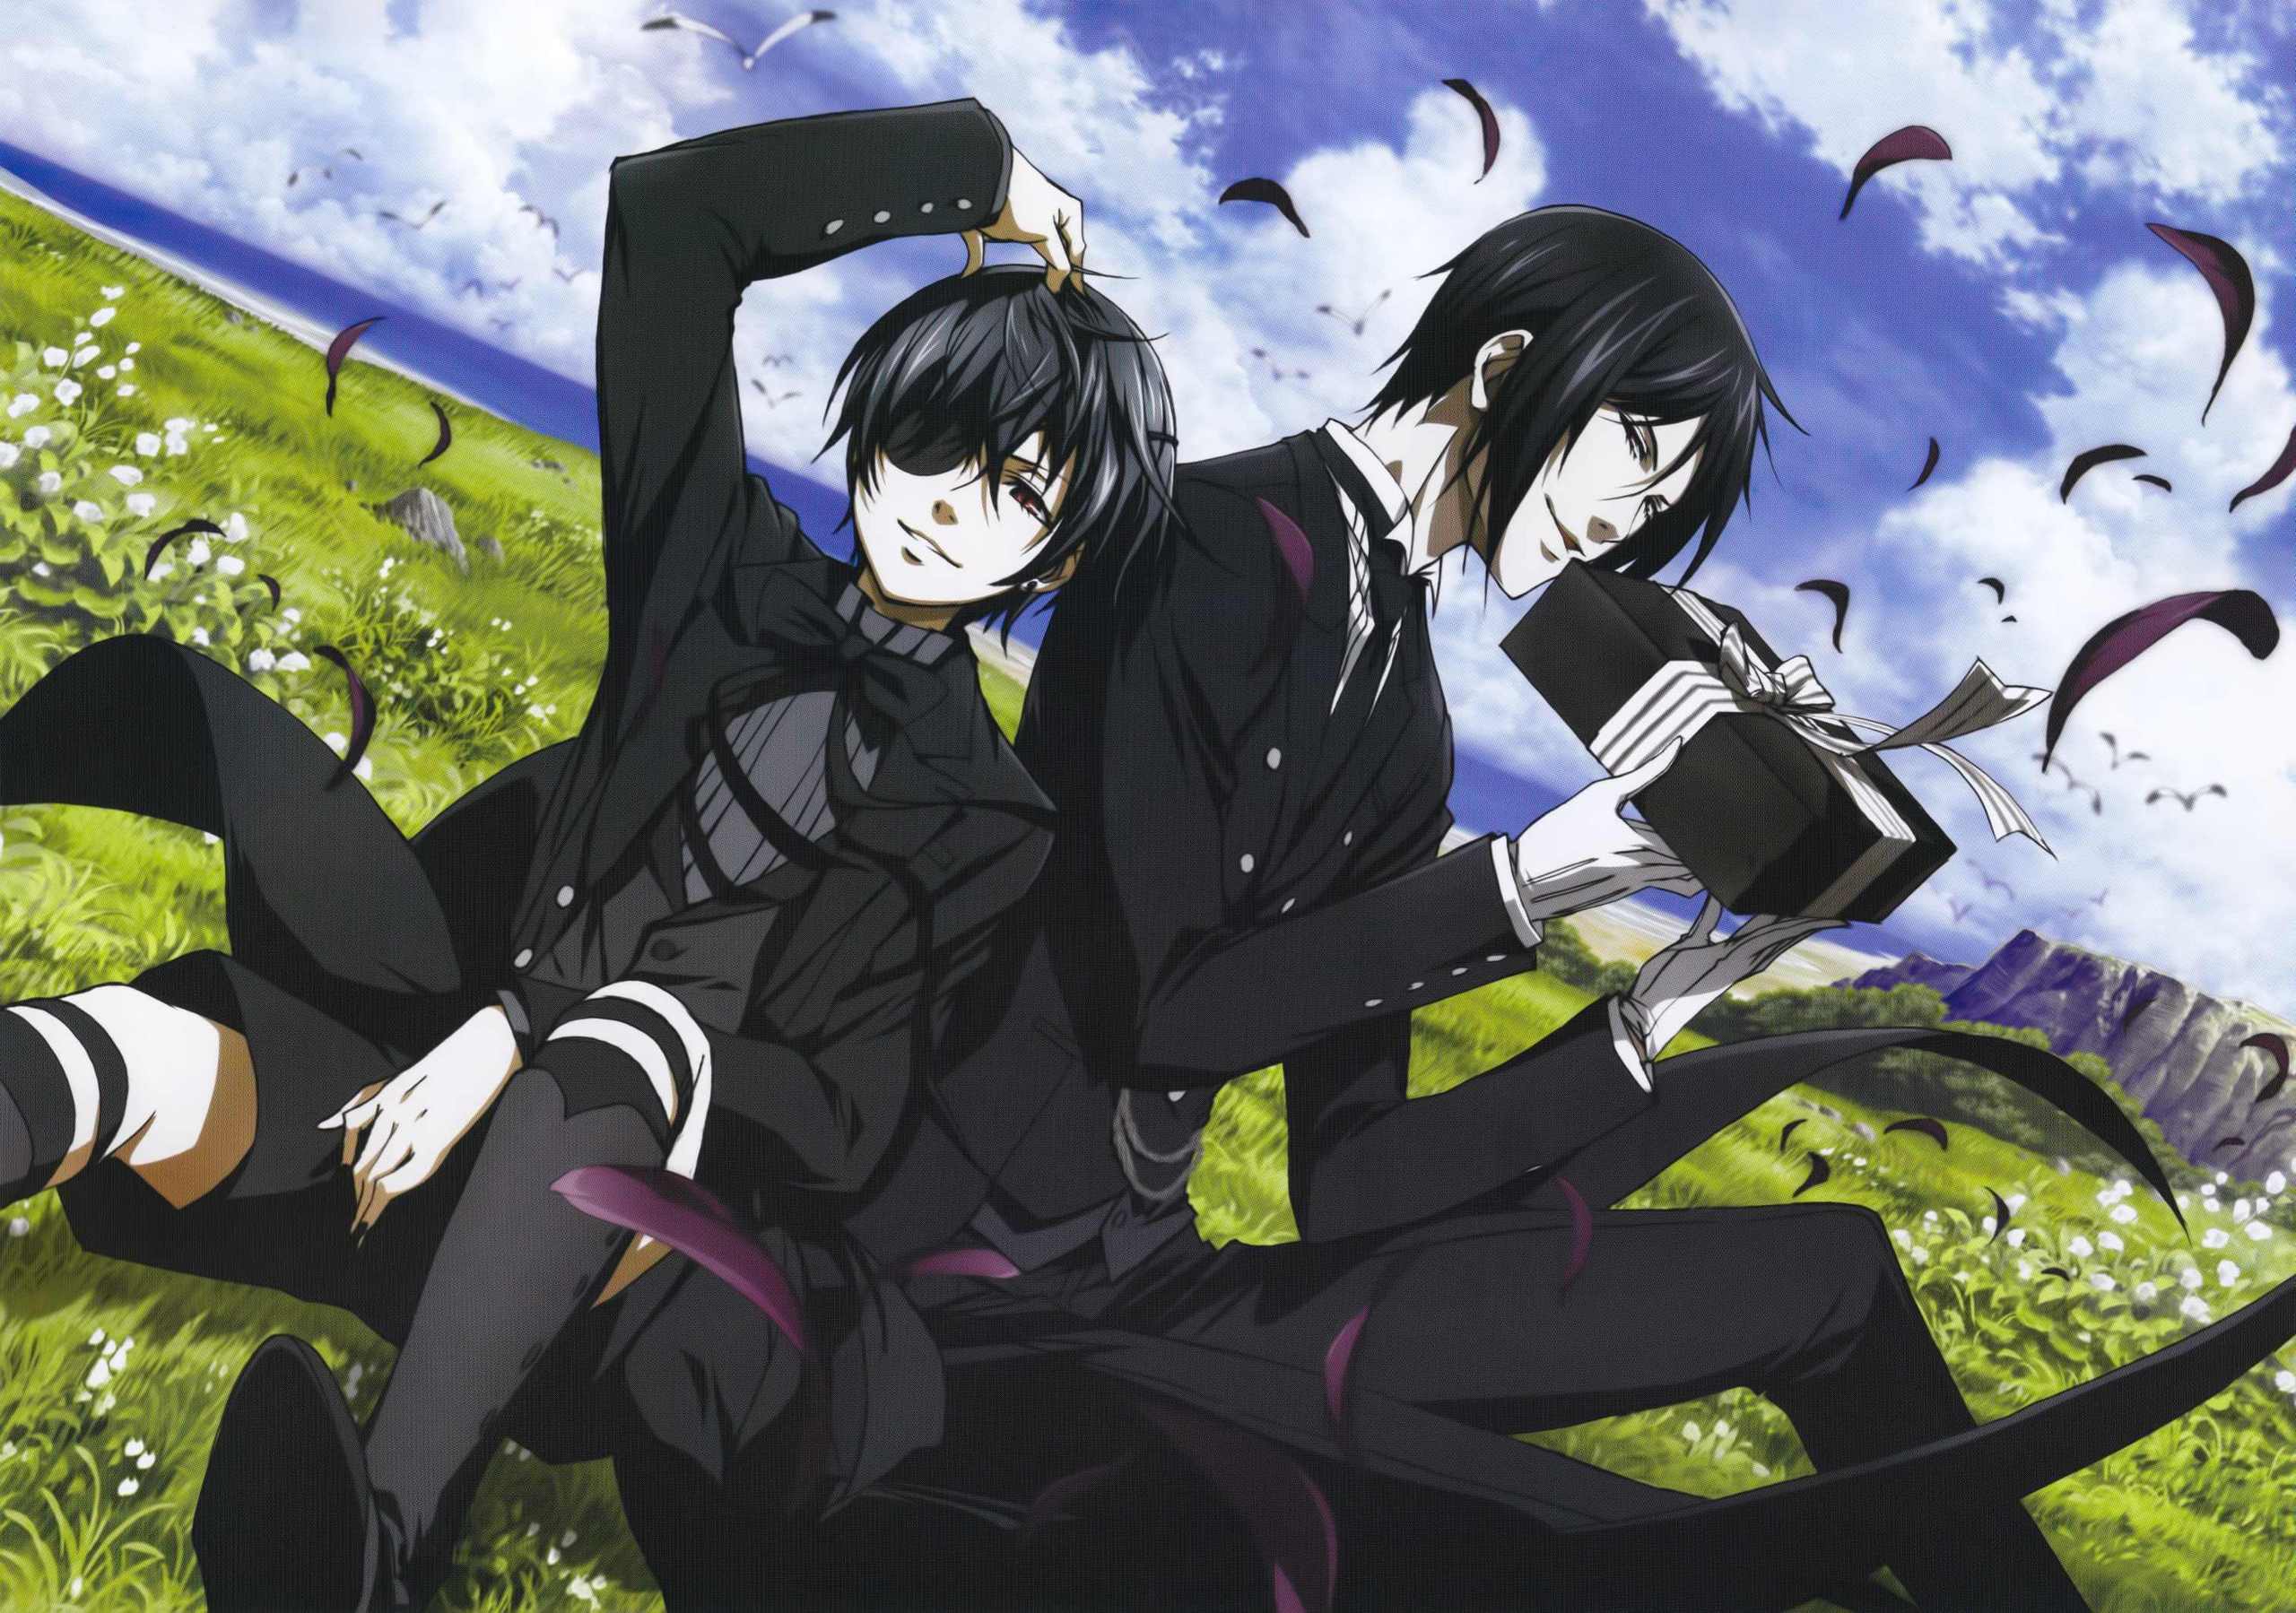 Ciel,his butler and others